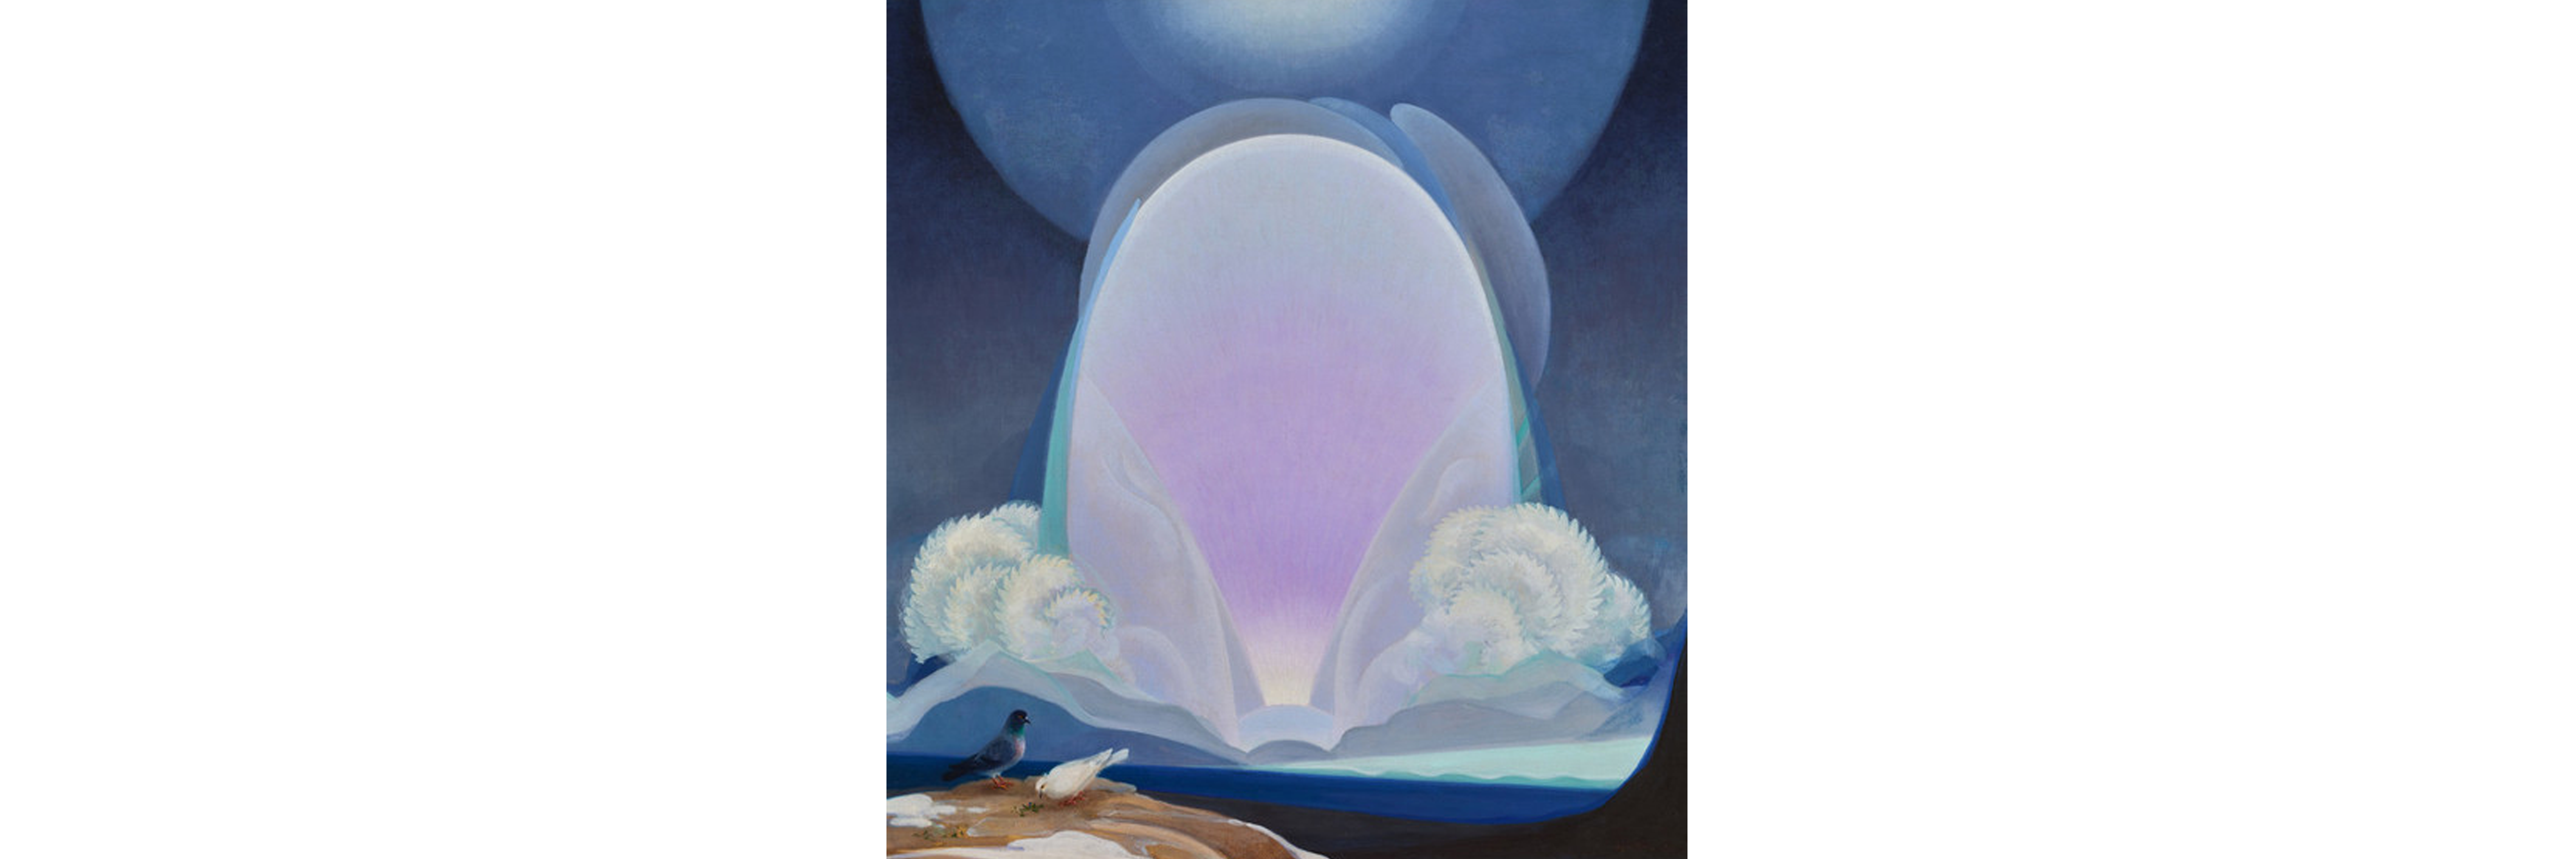 Agnes Pelton, Winter, 1933, Crocker Art Museum Purchase; Paul LeBaron Thiebaud, George and Bea Gibson Fund, Denise and Donald C. Timmons, Melza and Ted Barr, Sandra Jones, Linda M. Lawrence, Nancy Lawrence and Gordon Klein, Nancy S. and Dennis N. Marks, William L. Snider and Brian Cameron, Stephenson Foundation, Alan Templeton, A.J. and Susana Mollinet Watson, and other donors, 2013.54